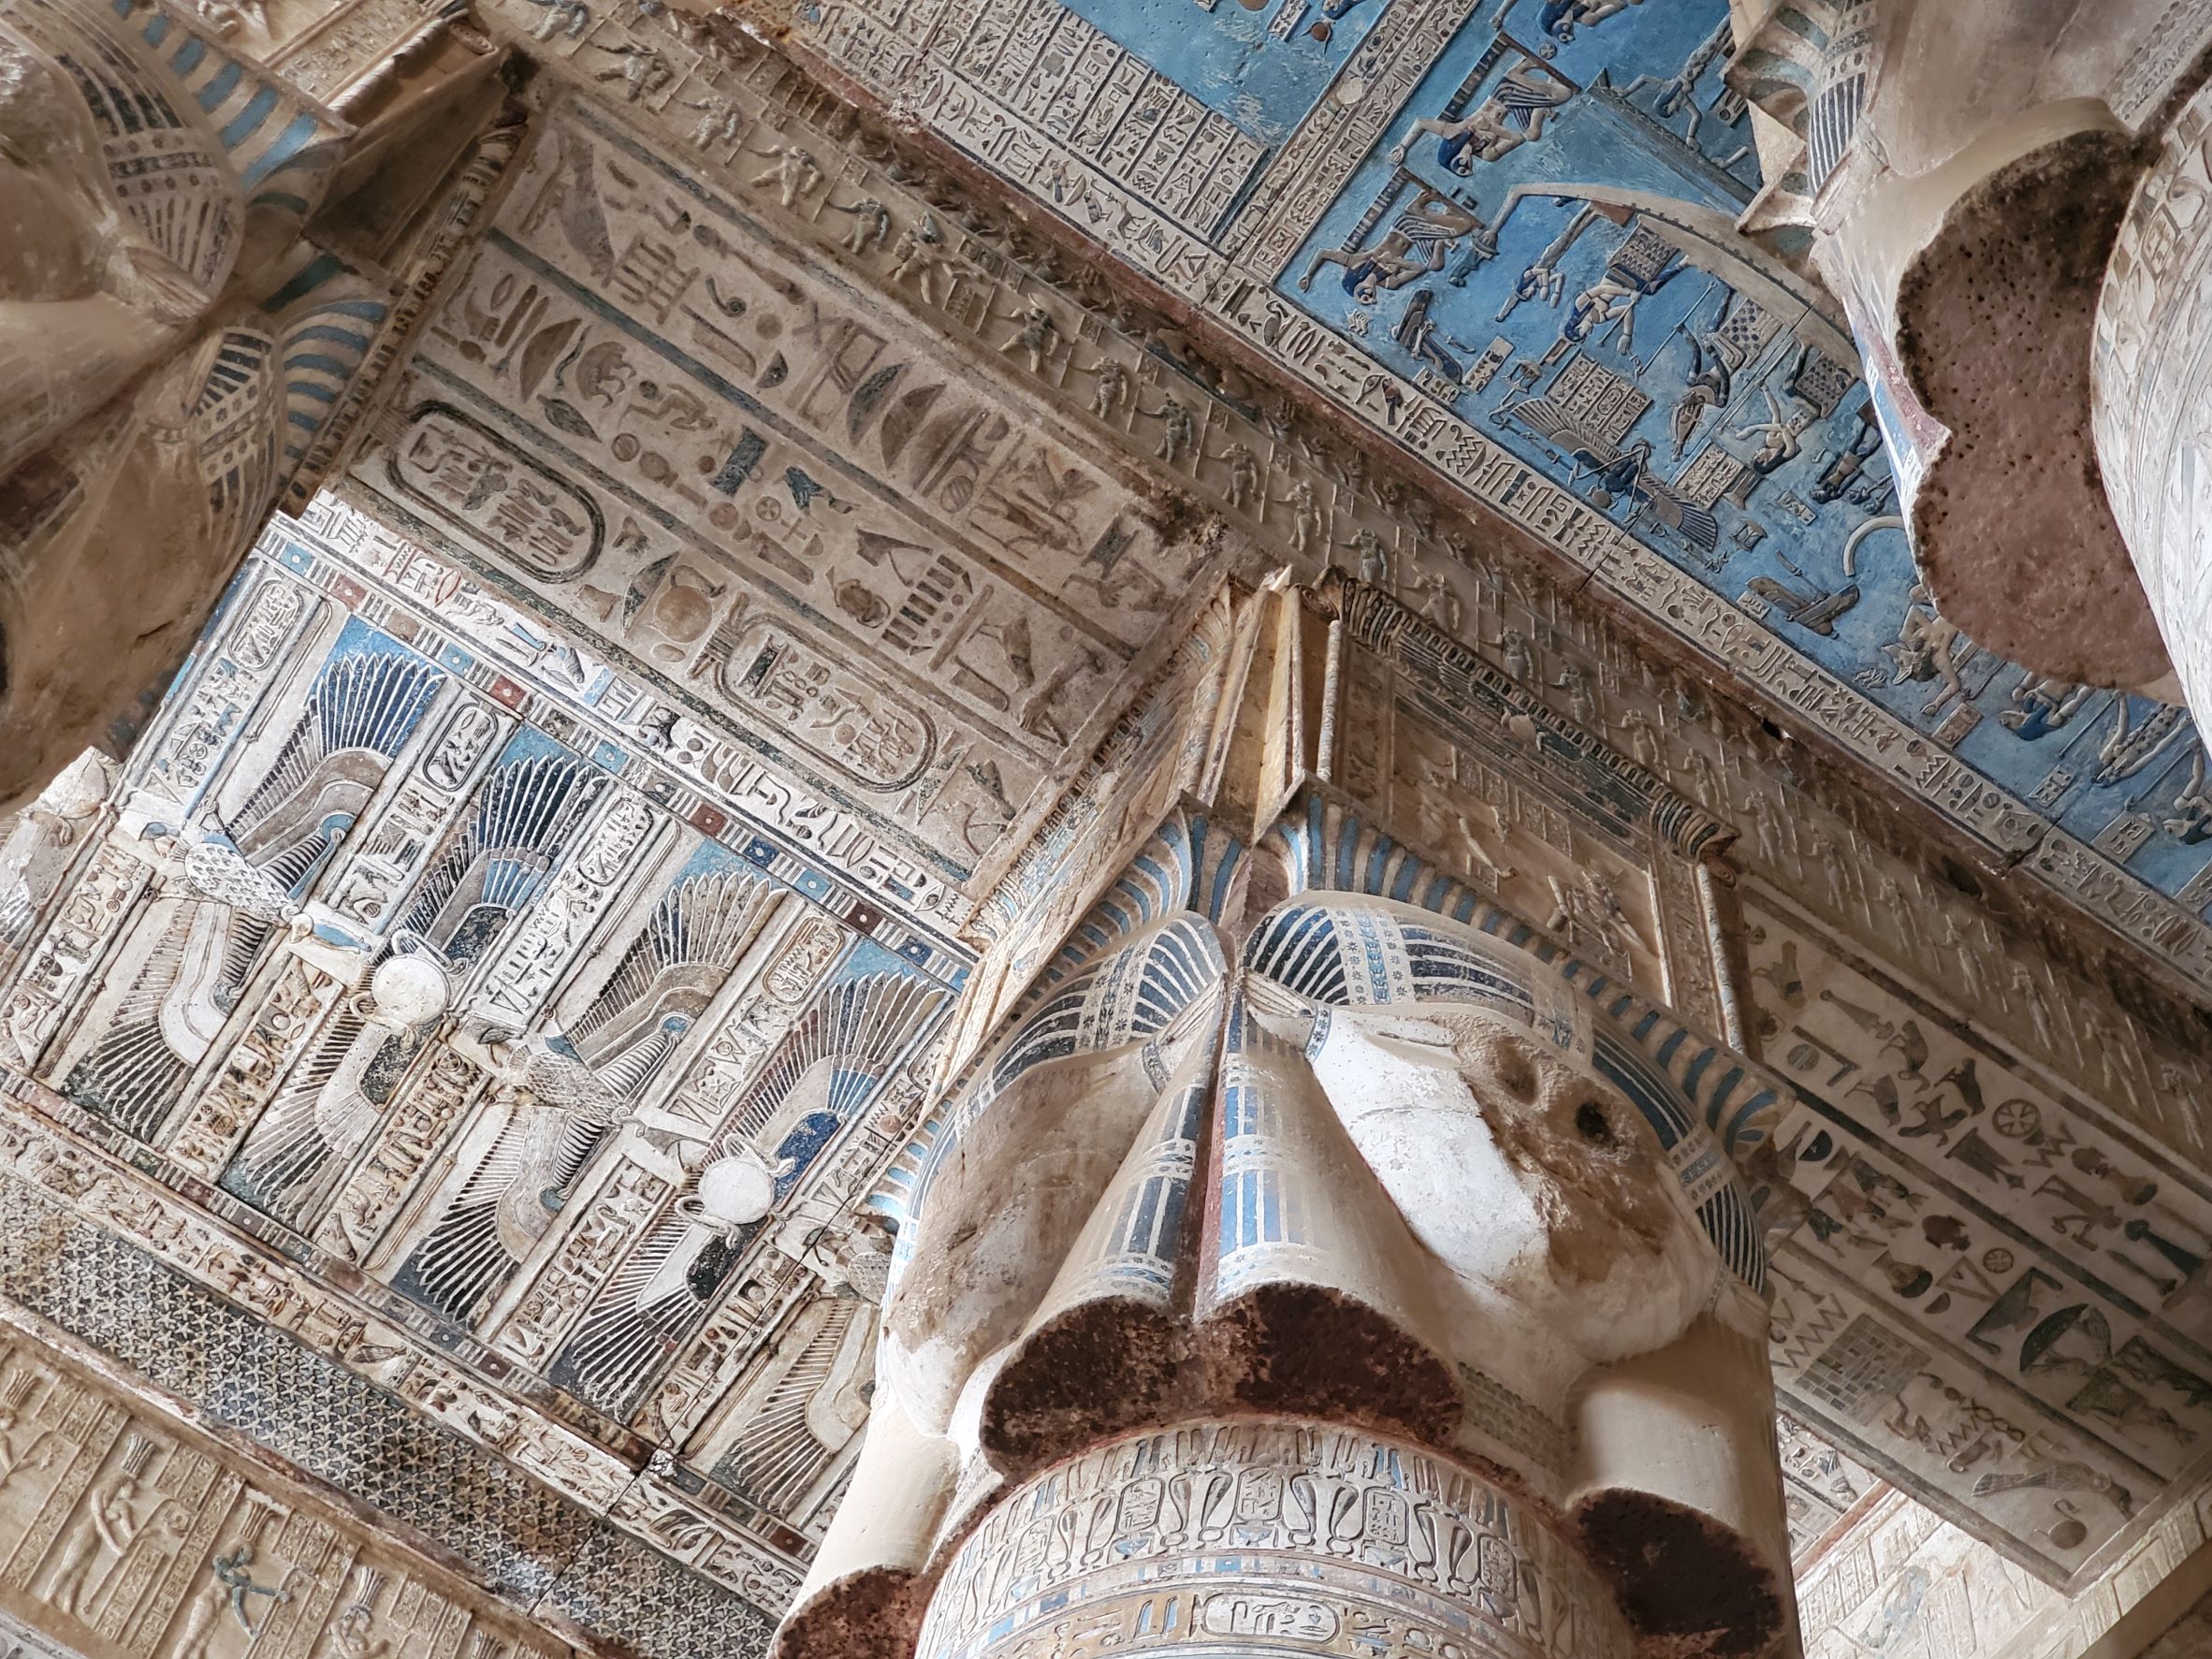 Beautifully decorated ceiling and column tops at Dendara Temple near Luxor, Egypt